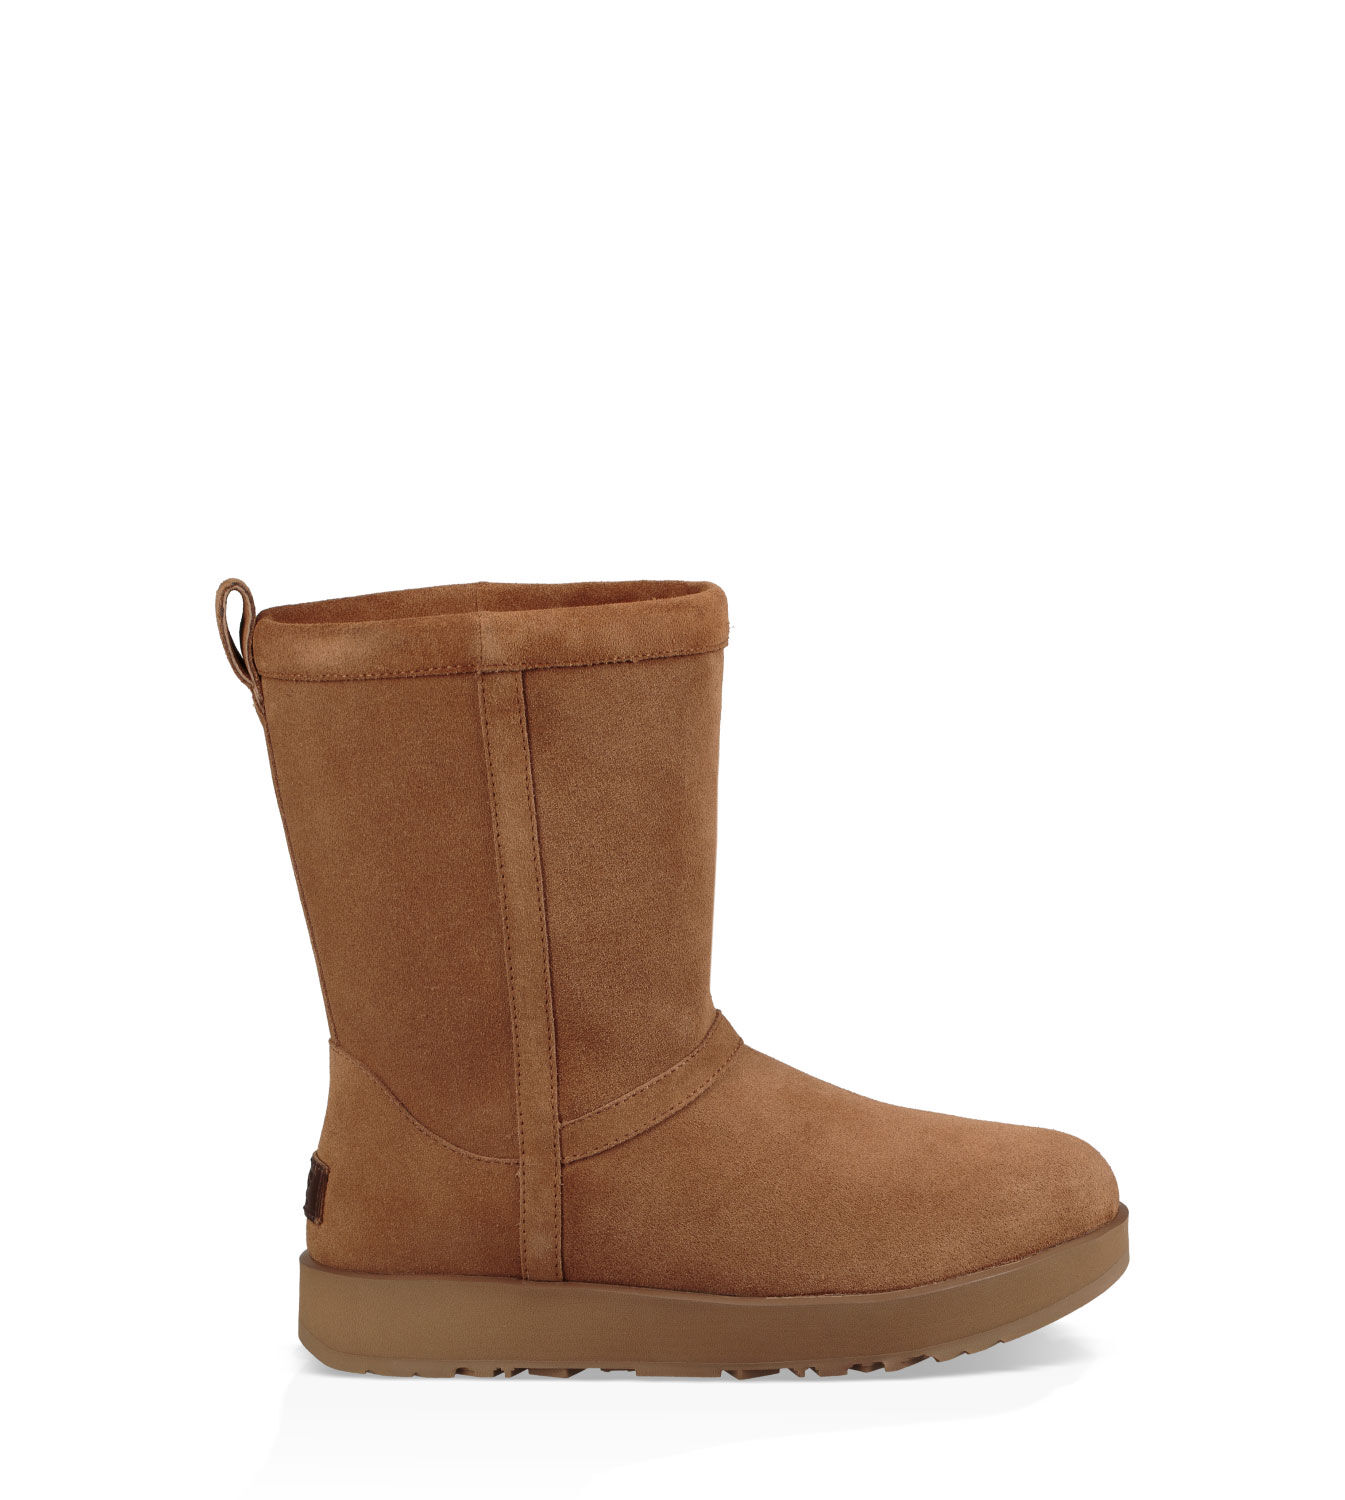 WN-Classic Short II-1016223 Water//Stain Resistant-100/%Authentic-Chocolate UGGÂ®